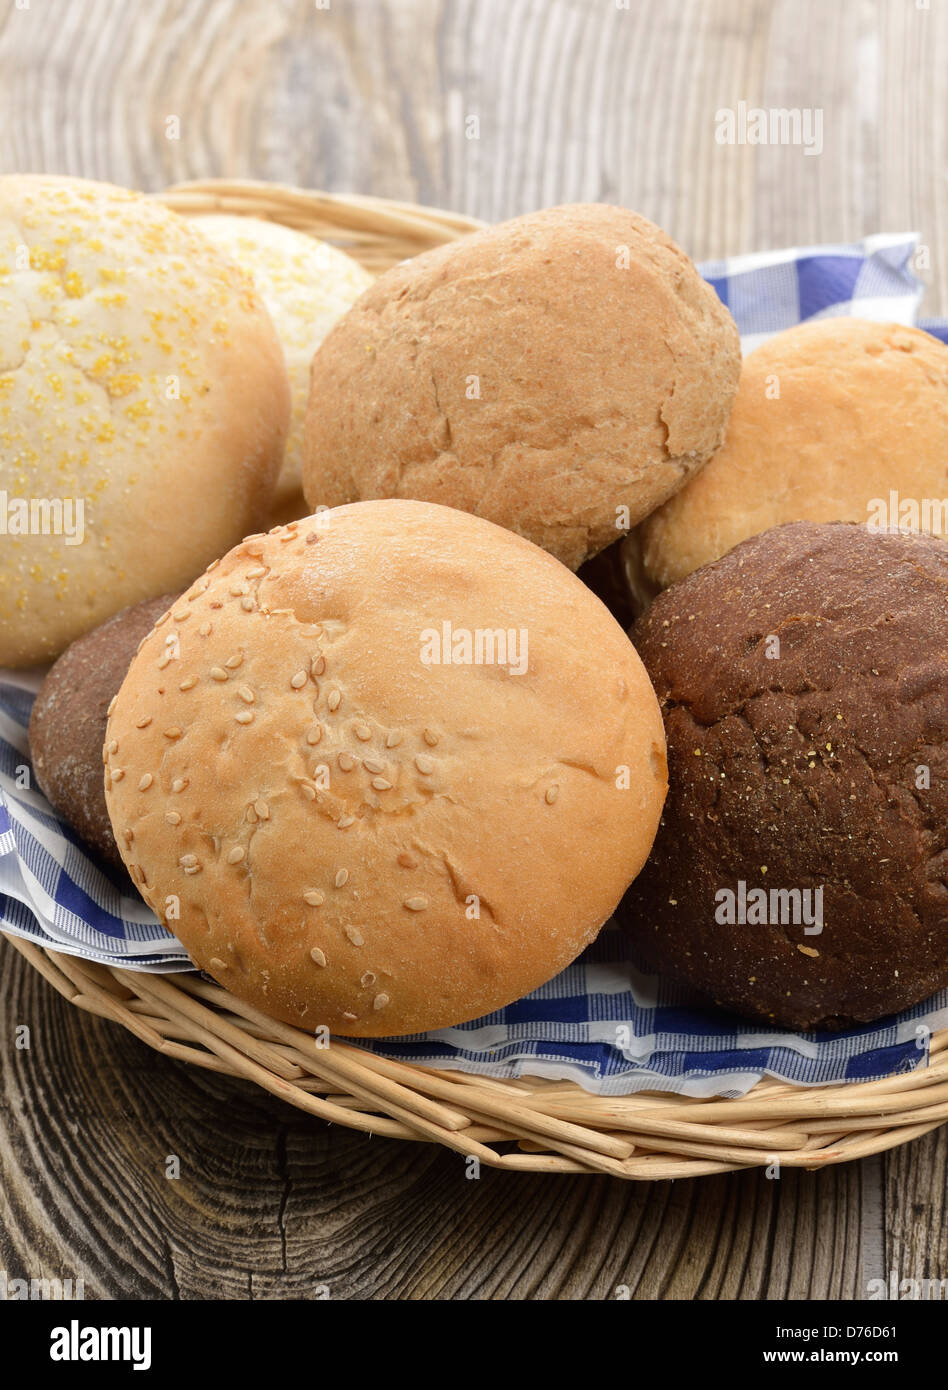 Bread Buns Assortment In A Basket Stock Photo